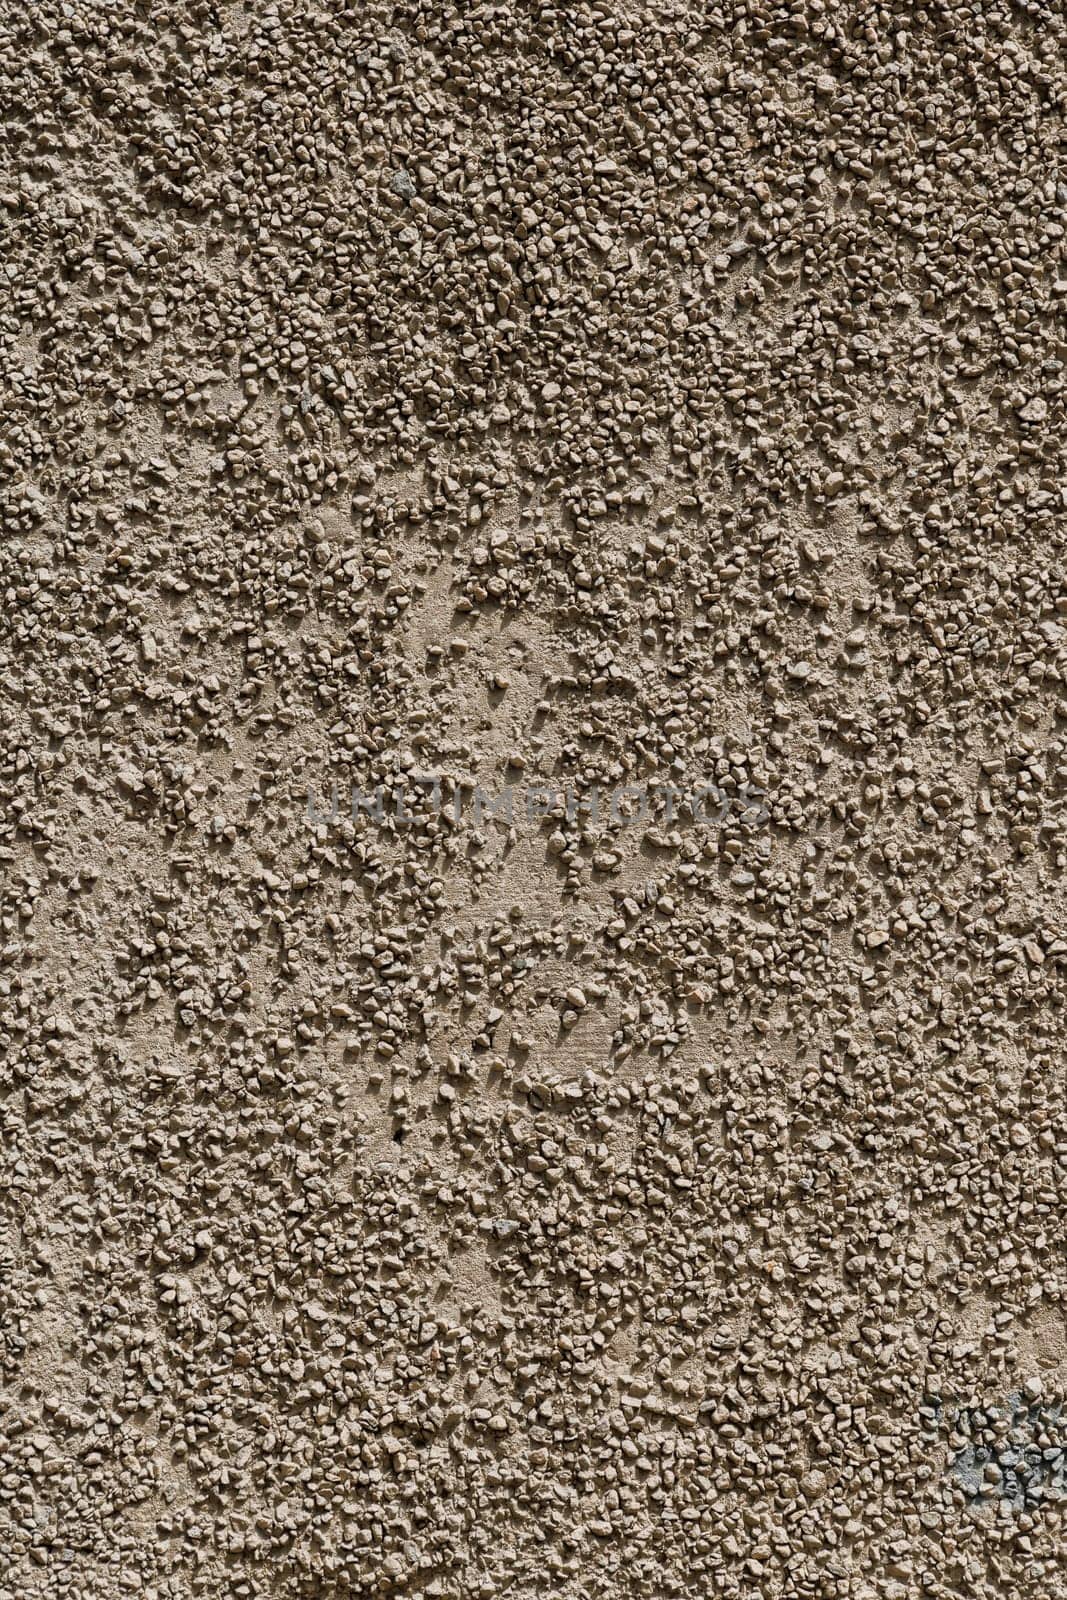 small gravel stucco wall finish texture and full-frame background by z1b